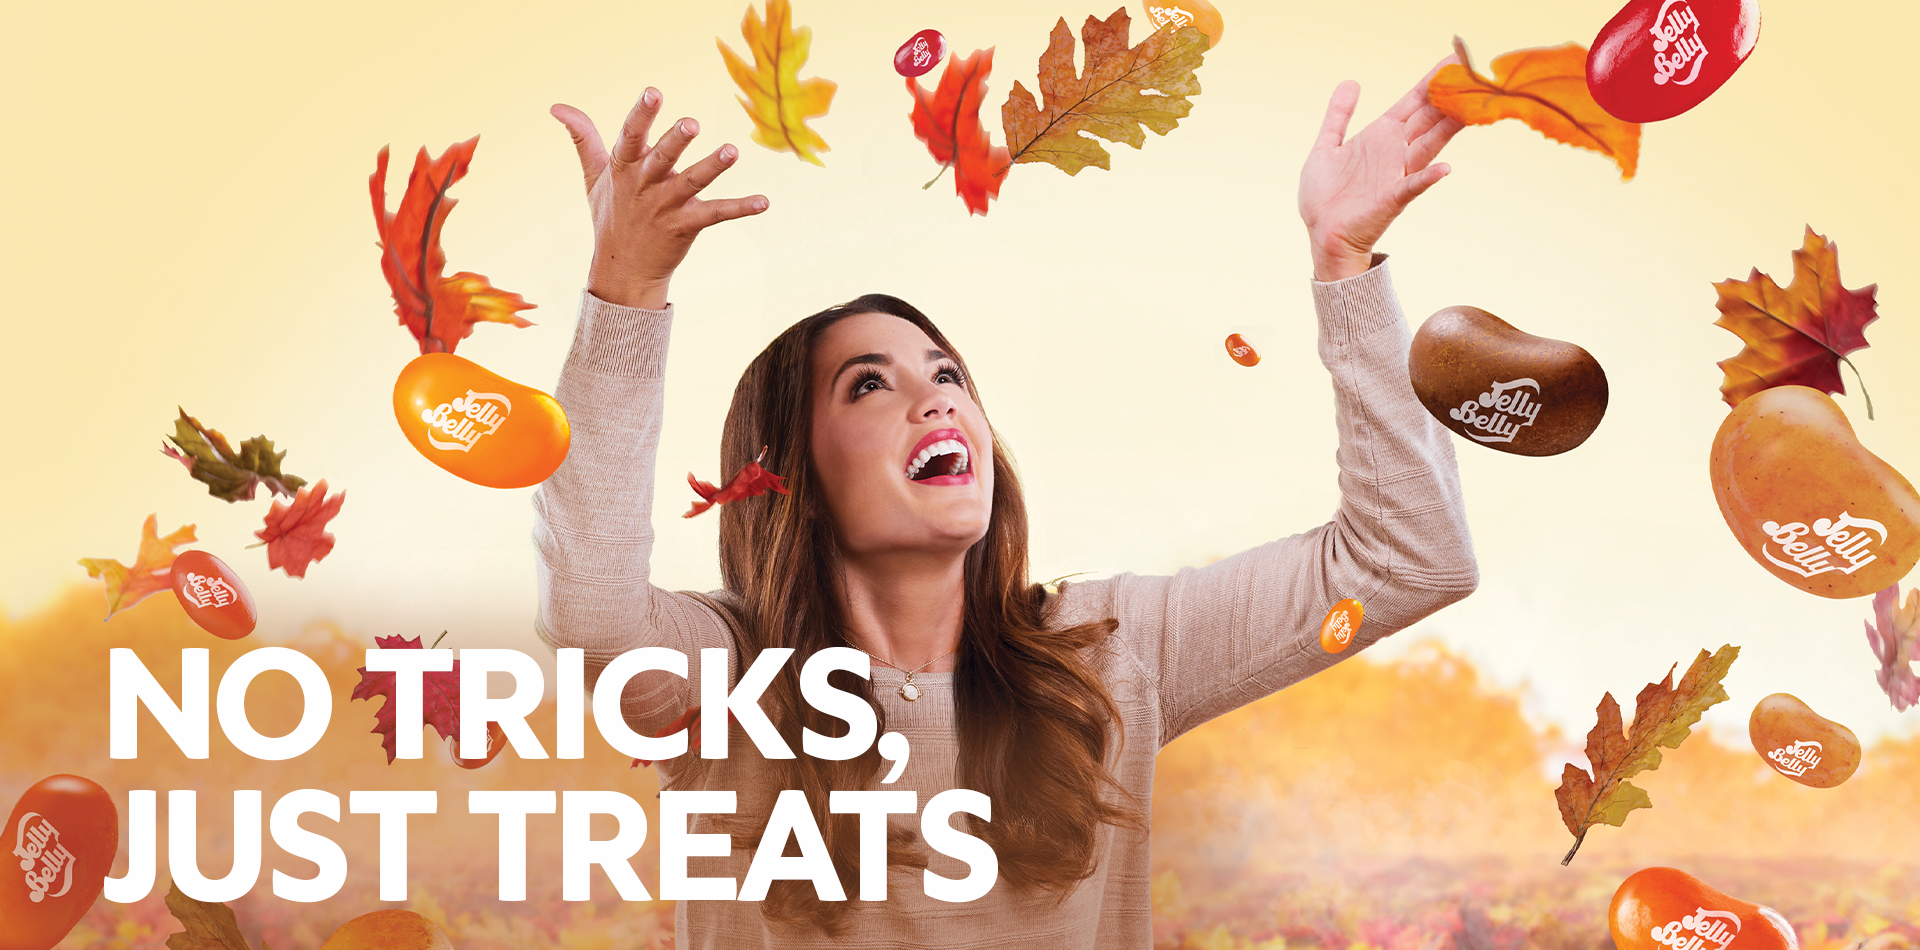 Woman tossing leaves and jelly beans in the air, with text No Tricks, Just Treats